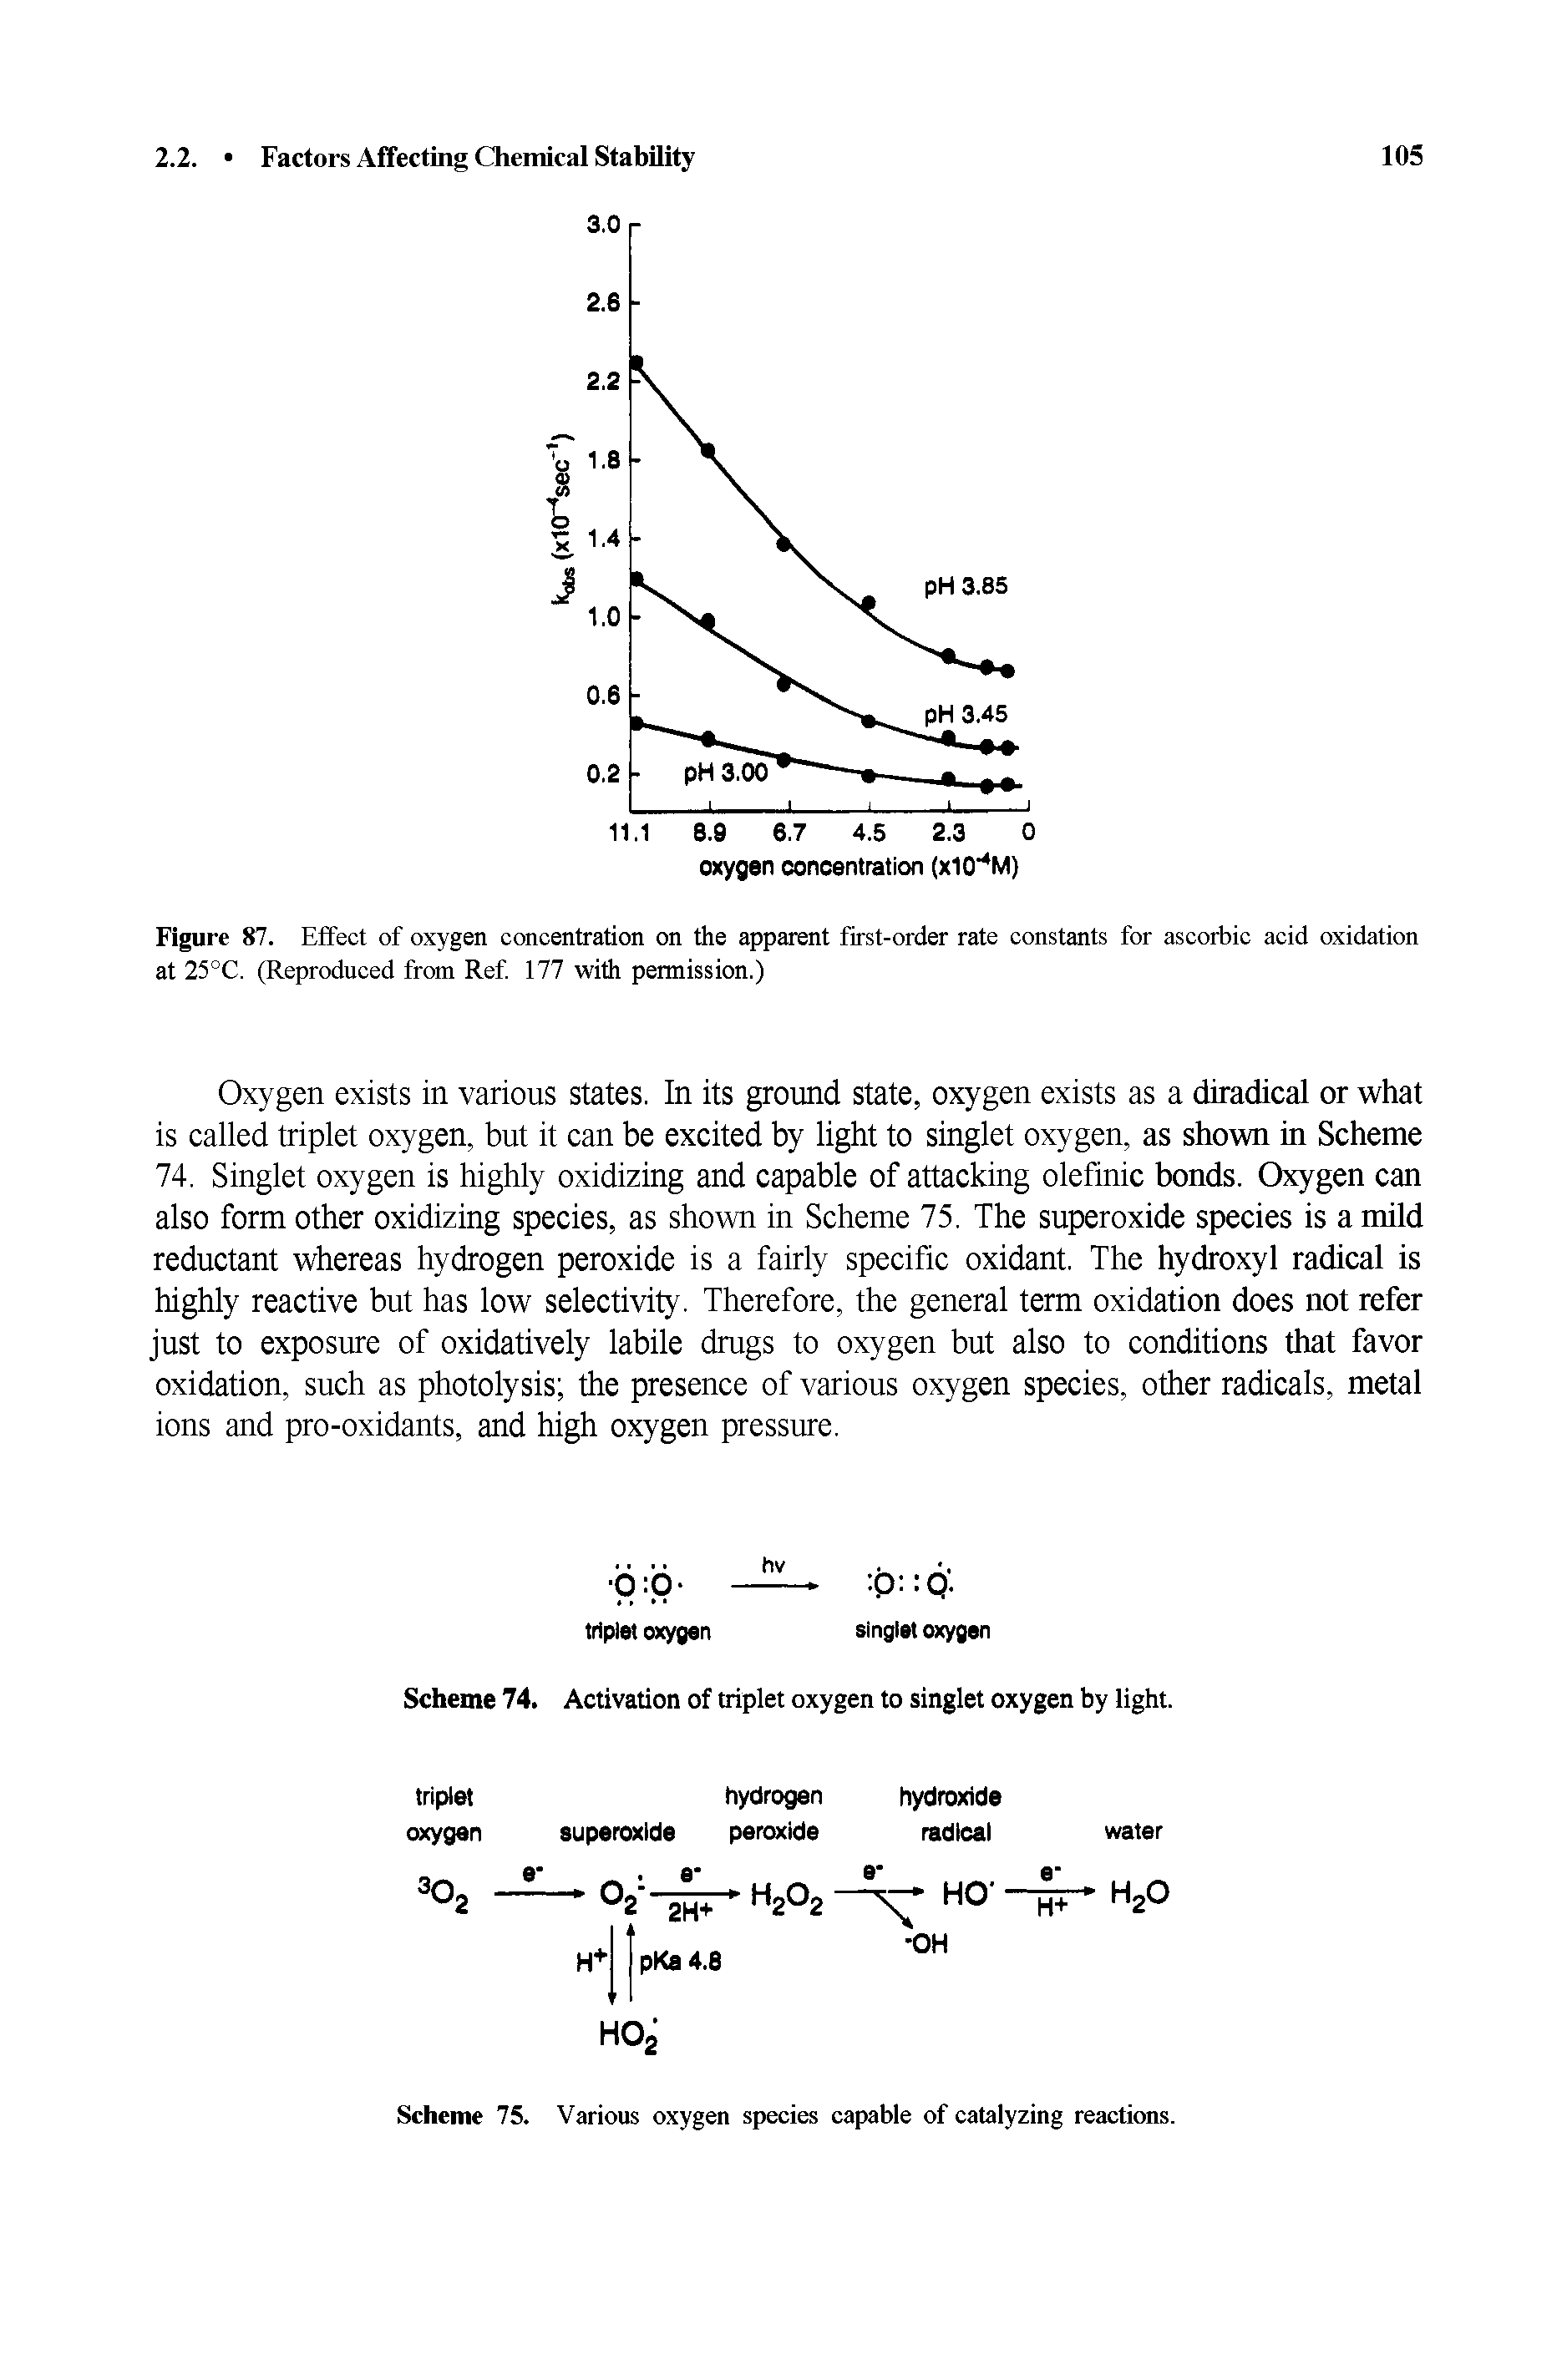 Figure 87. Effect of oxygen concentration on the apparent first-order rate constants for ascorbic acid oxidation at 25°C. (Reproduced from Ref. 177 with permission.)...